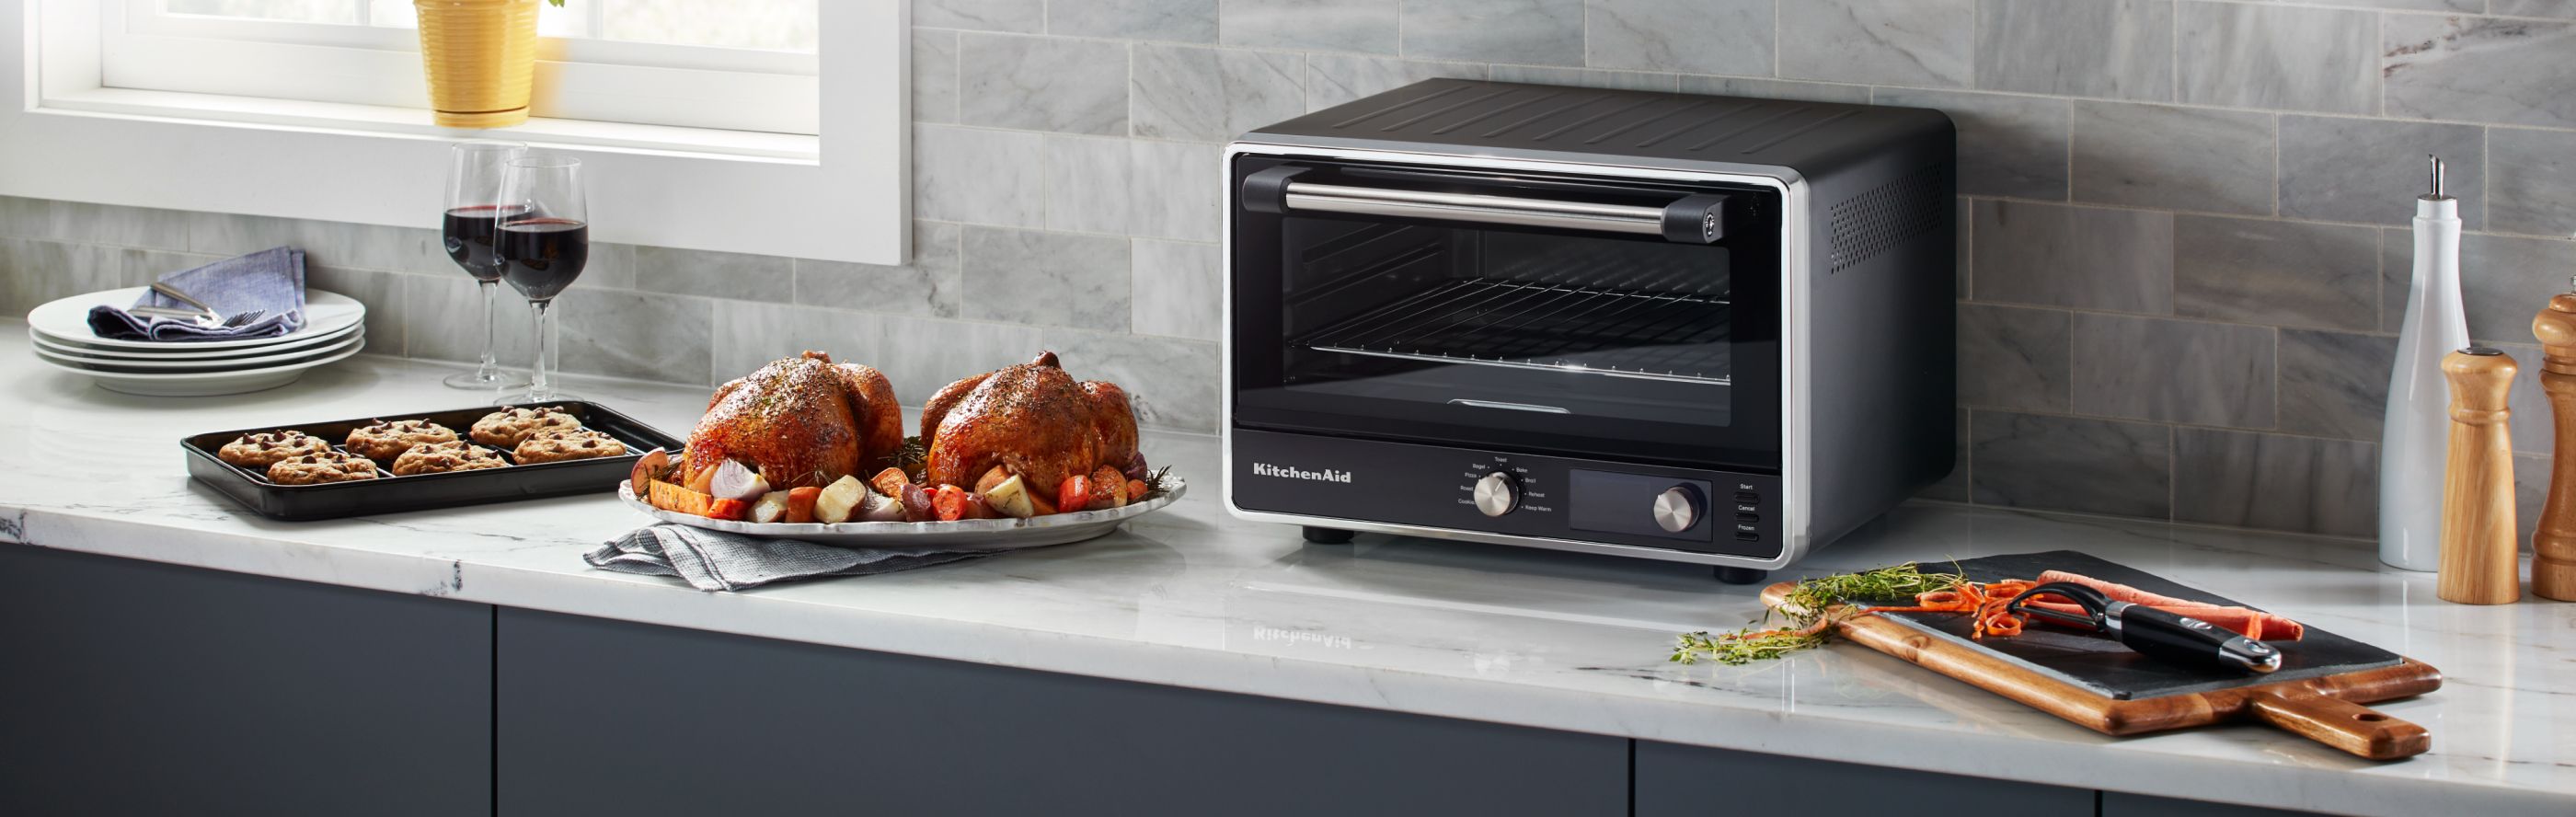 KitchenAid® countertop oven next to roasted chicken and a tray of cookies